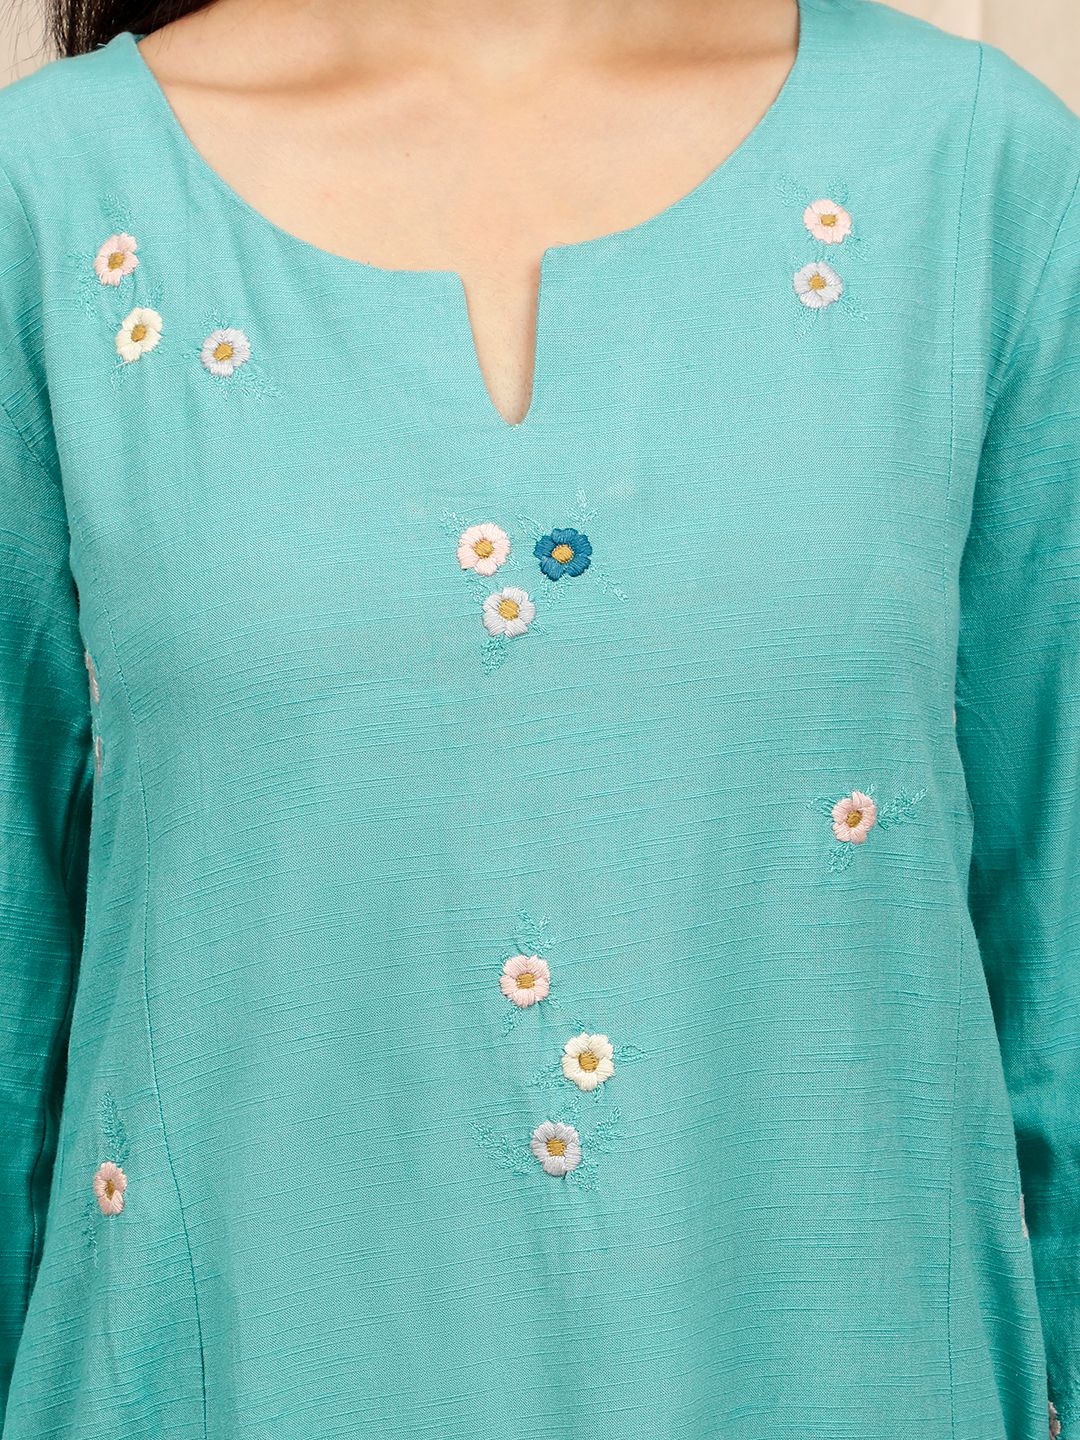 GREEN FLORAL EMBROIDERED KURTA